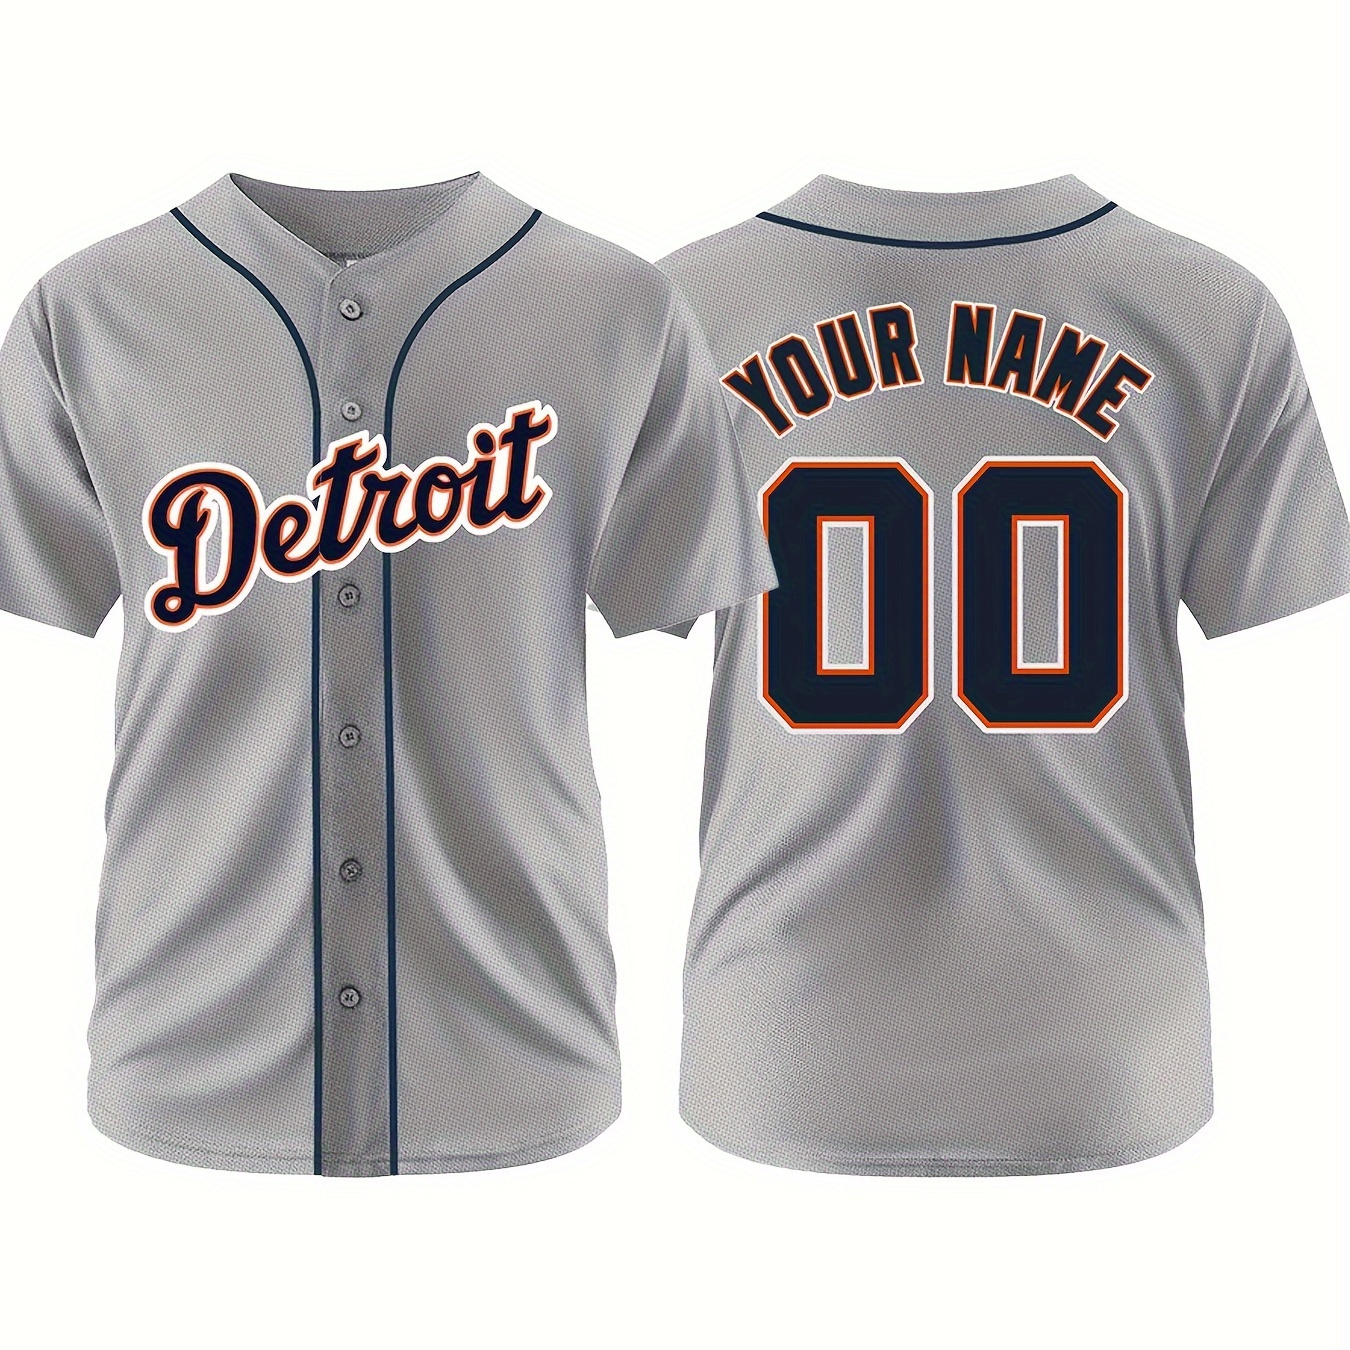 

Customized Name And Number Design, Men's Short Sleeve Loose Breathable V-neck Embroidery Baseball Jersey, Sports Shirt For Team Training